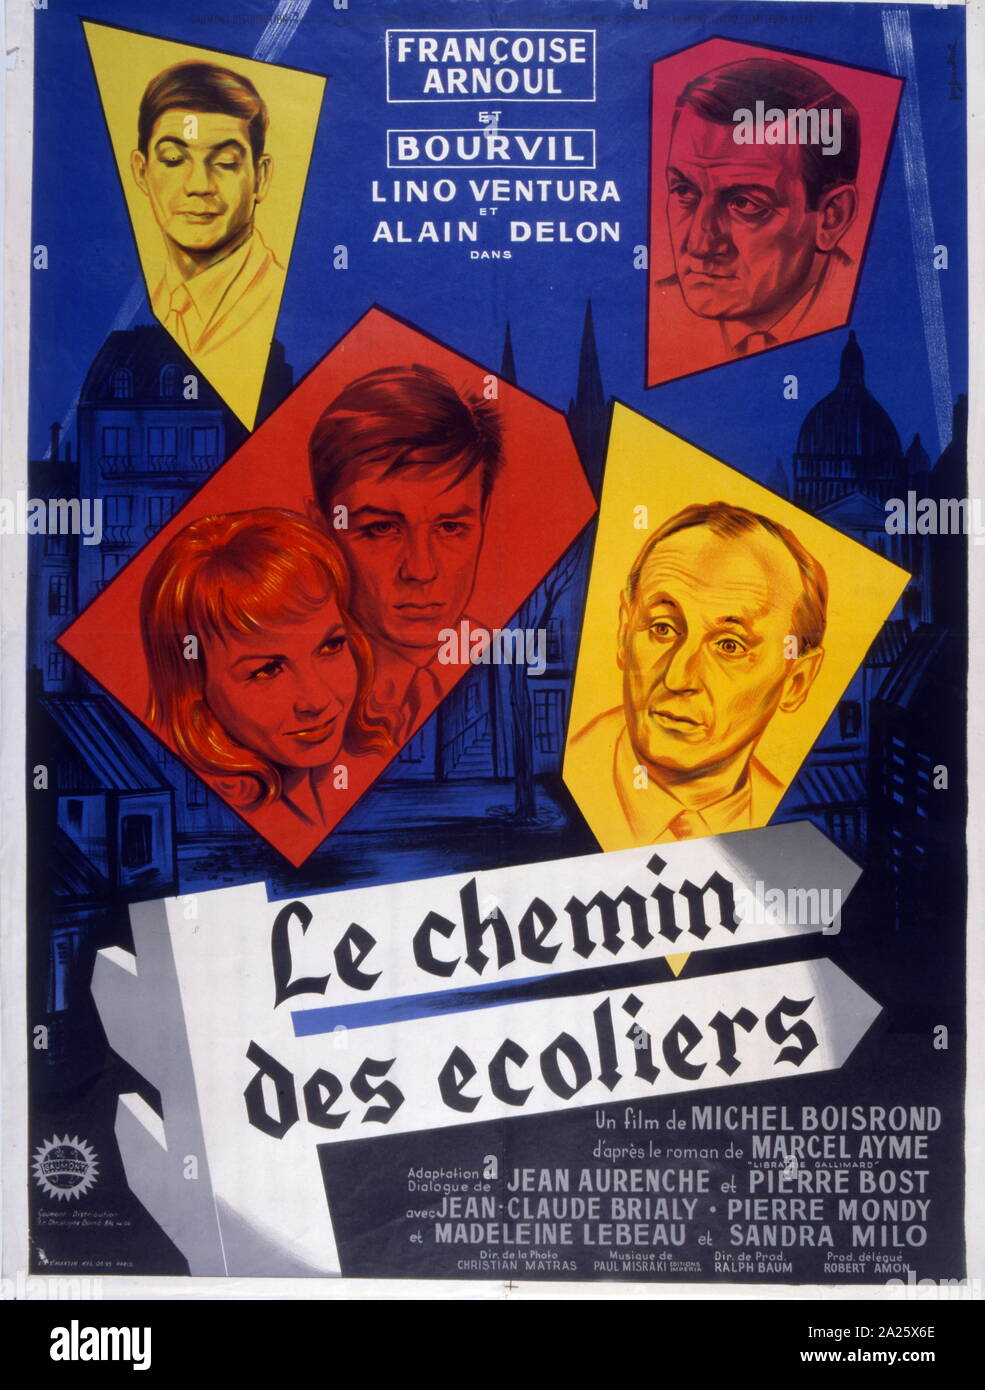 Film poster for 'Le chemin des ecoliers' a 1959 French film starring Alain Delon. It is based on the novel The Transient Hour by Marcel Ayme. Stock Photo